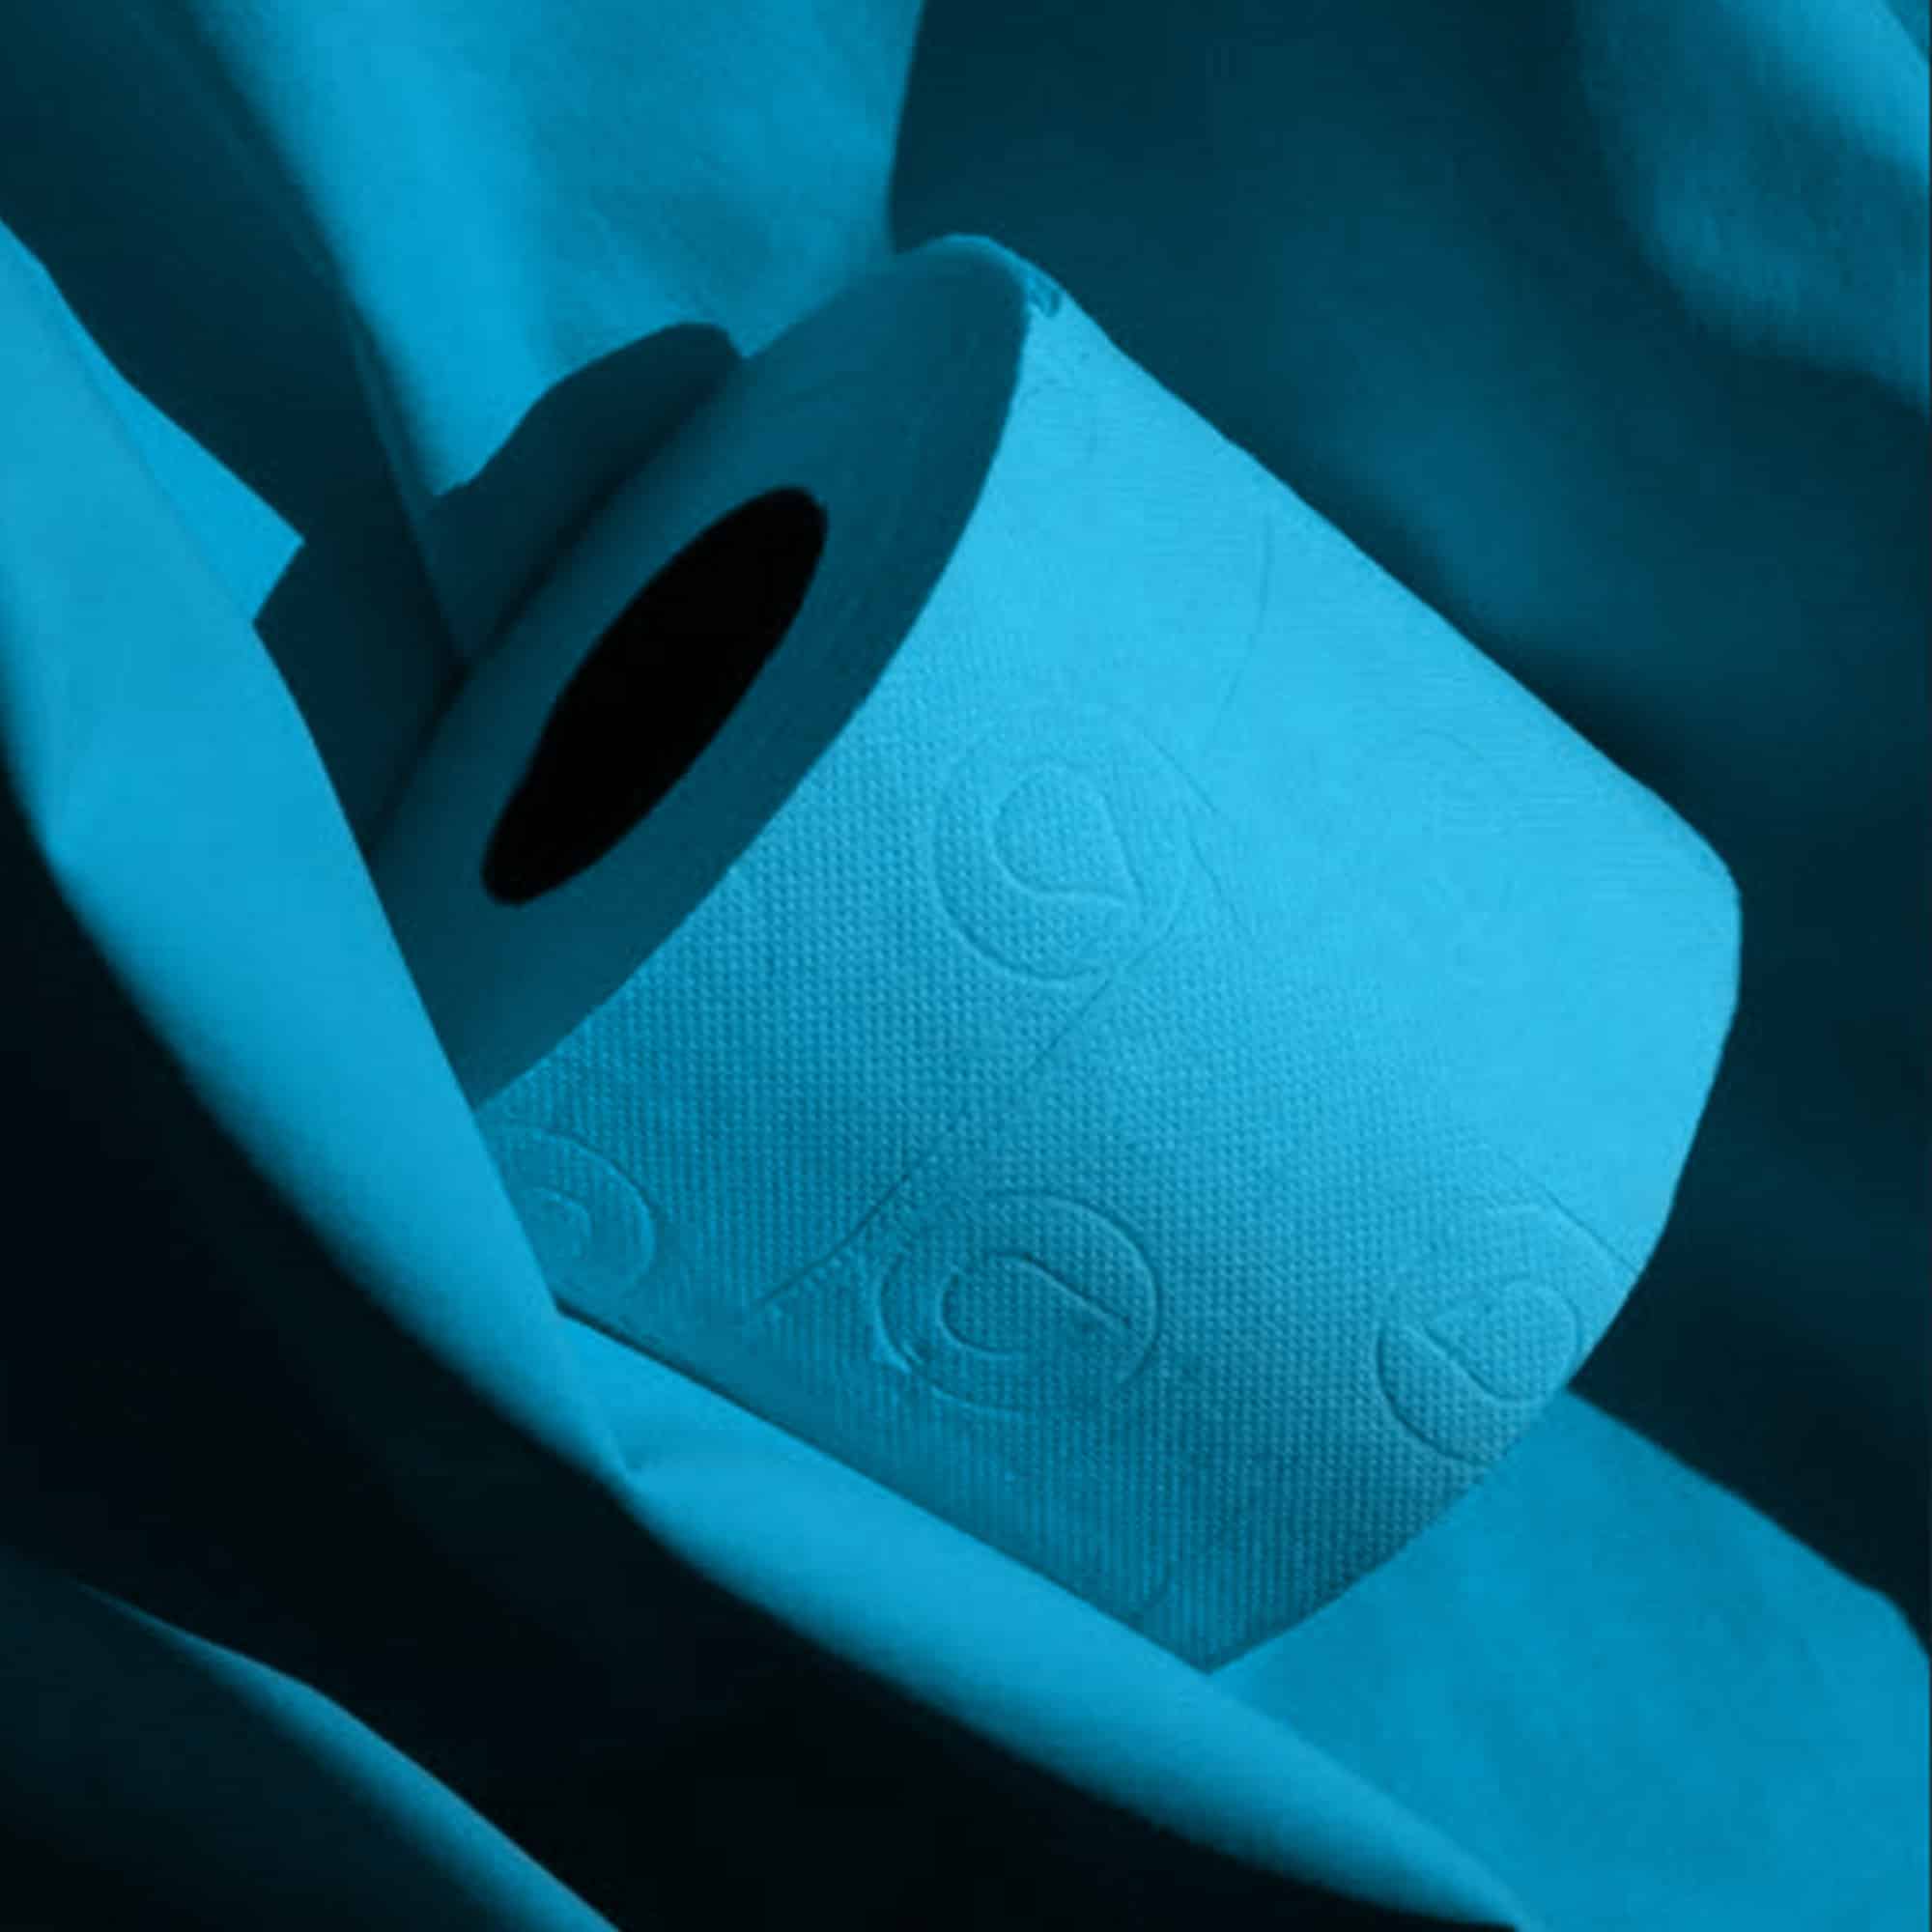 blue pack 6 rolls tissue bog roll toilet paper bath colored scented loo strong 3-ply soft texture